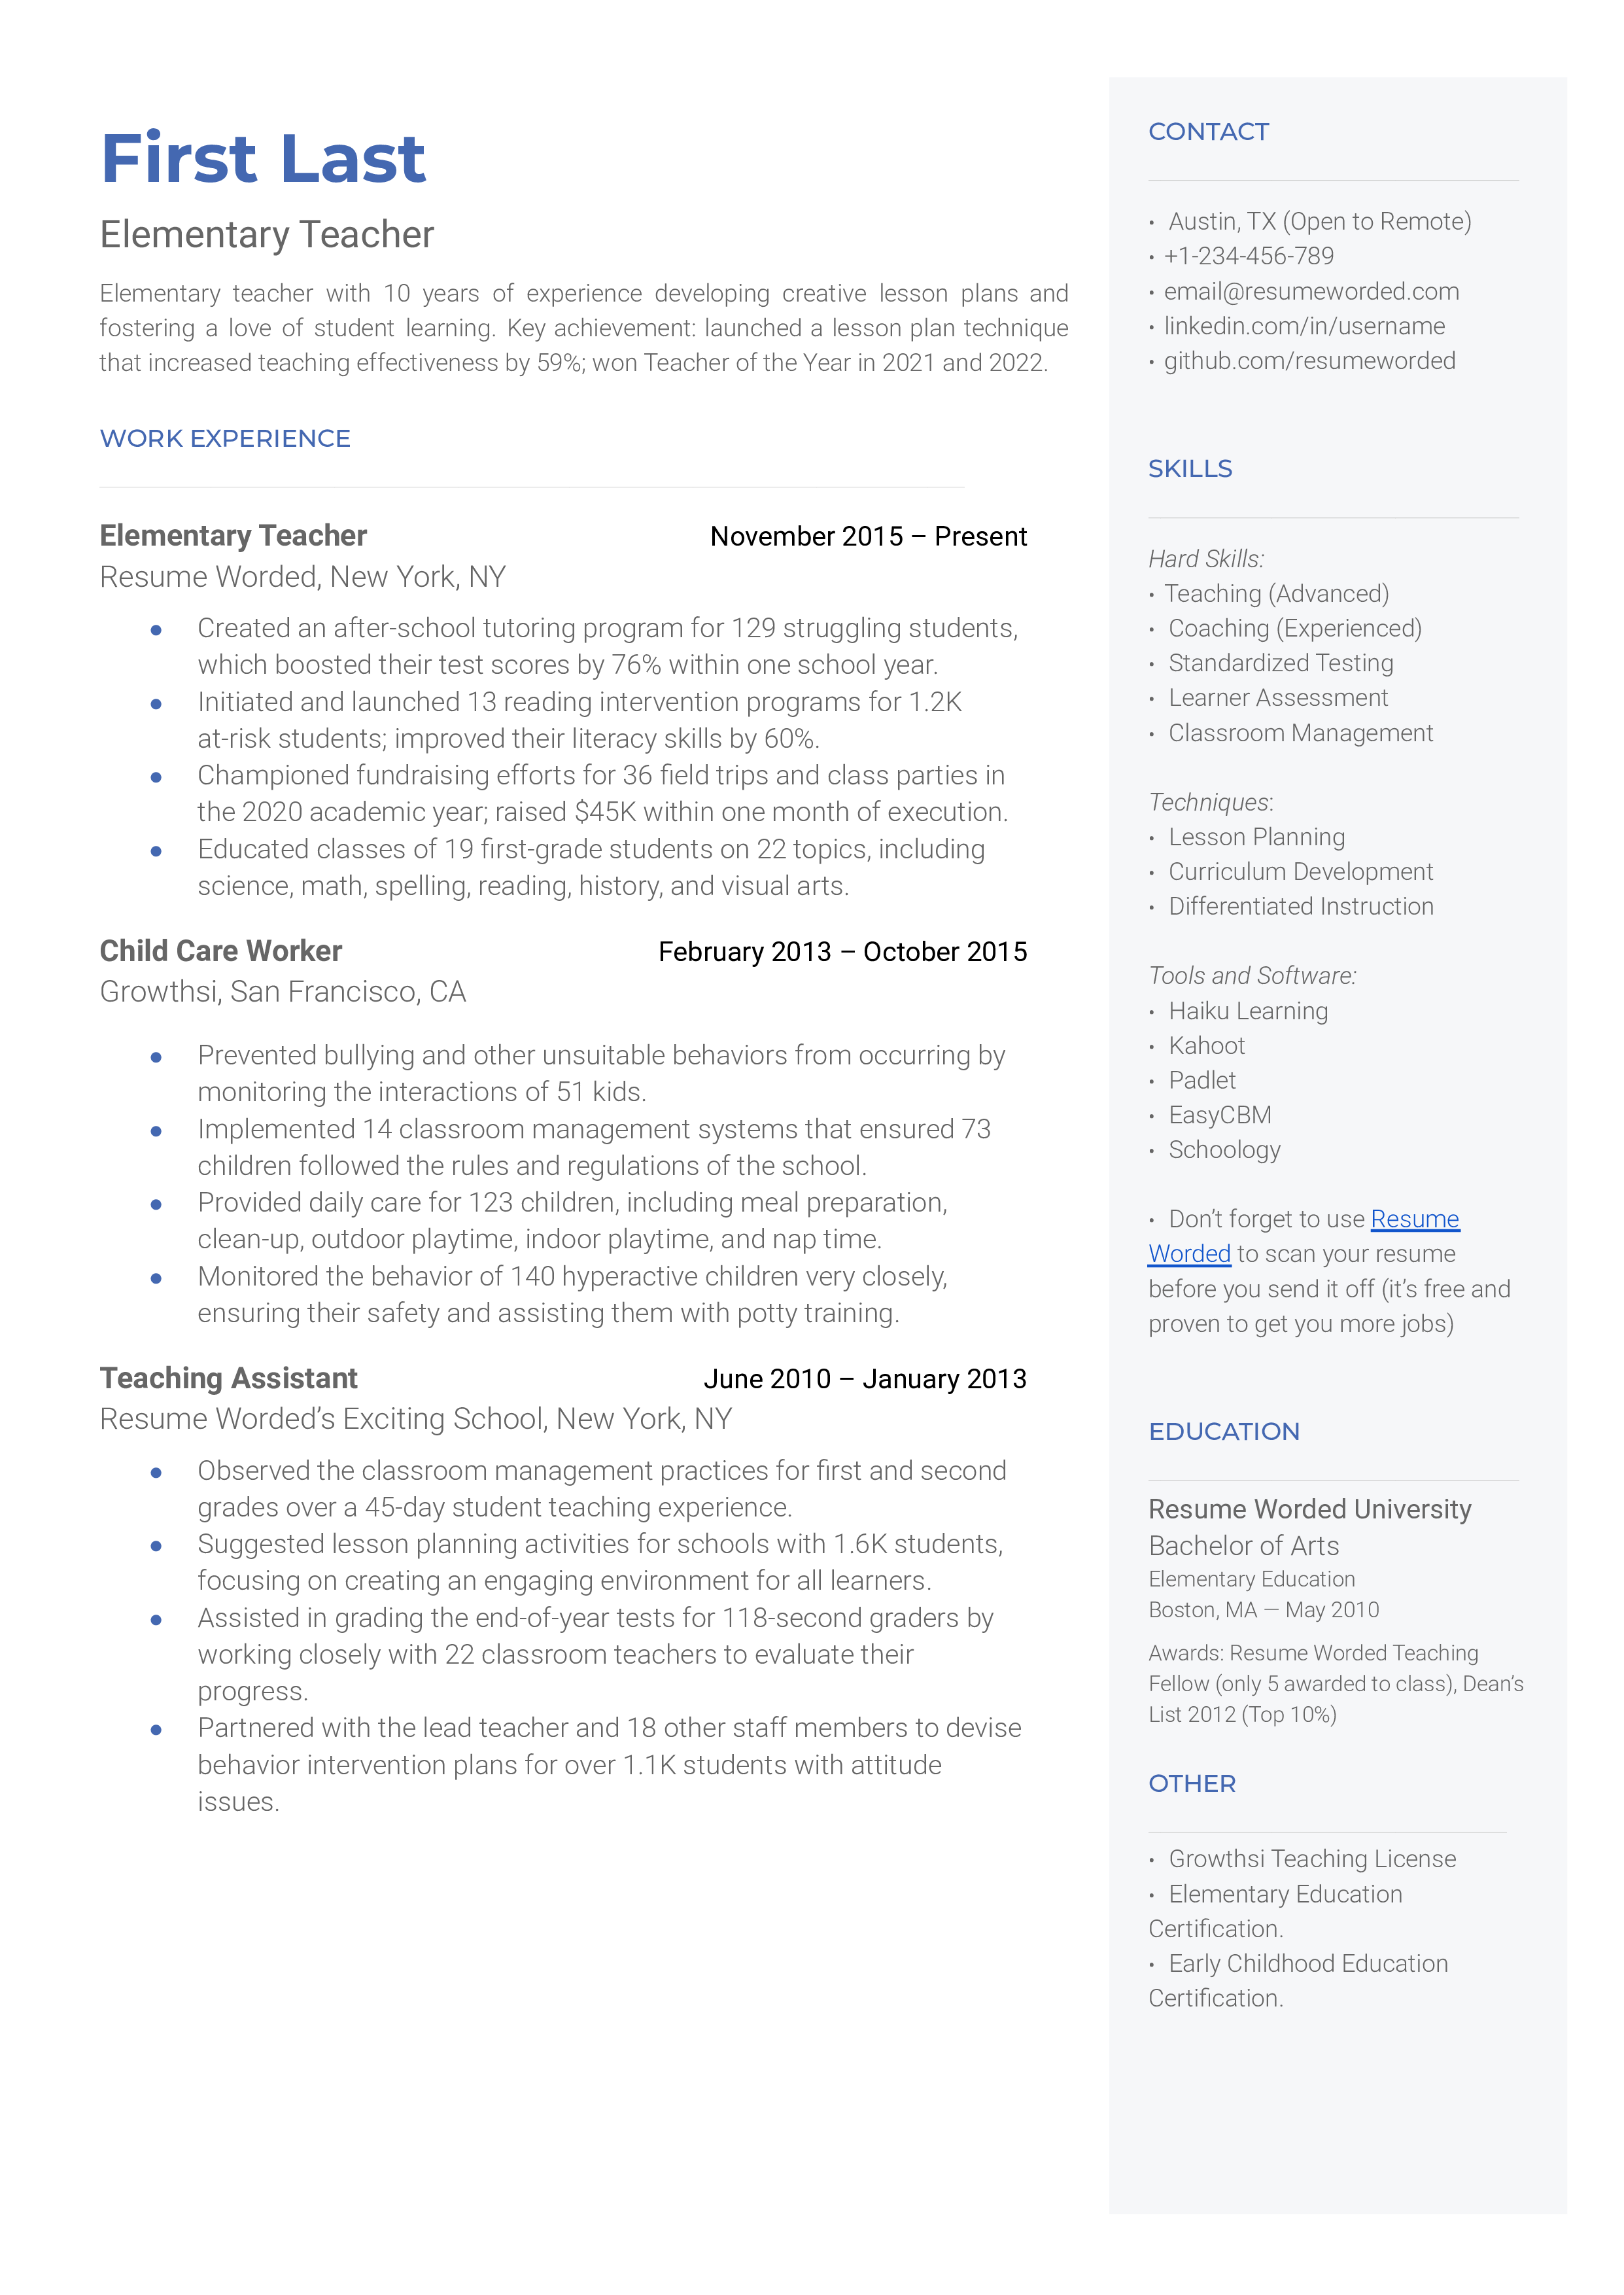 An elementary teacher resume sample that highlights the applicant’s certifications and initiative.